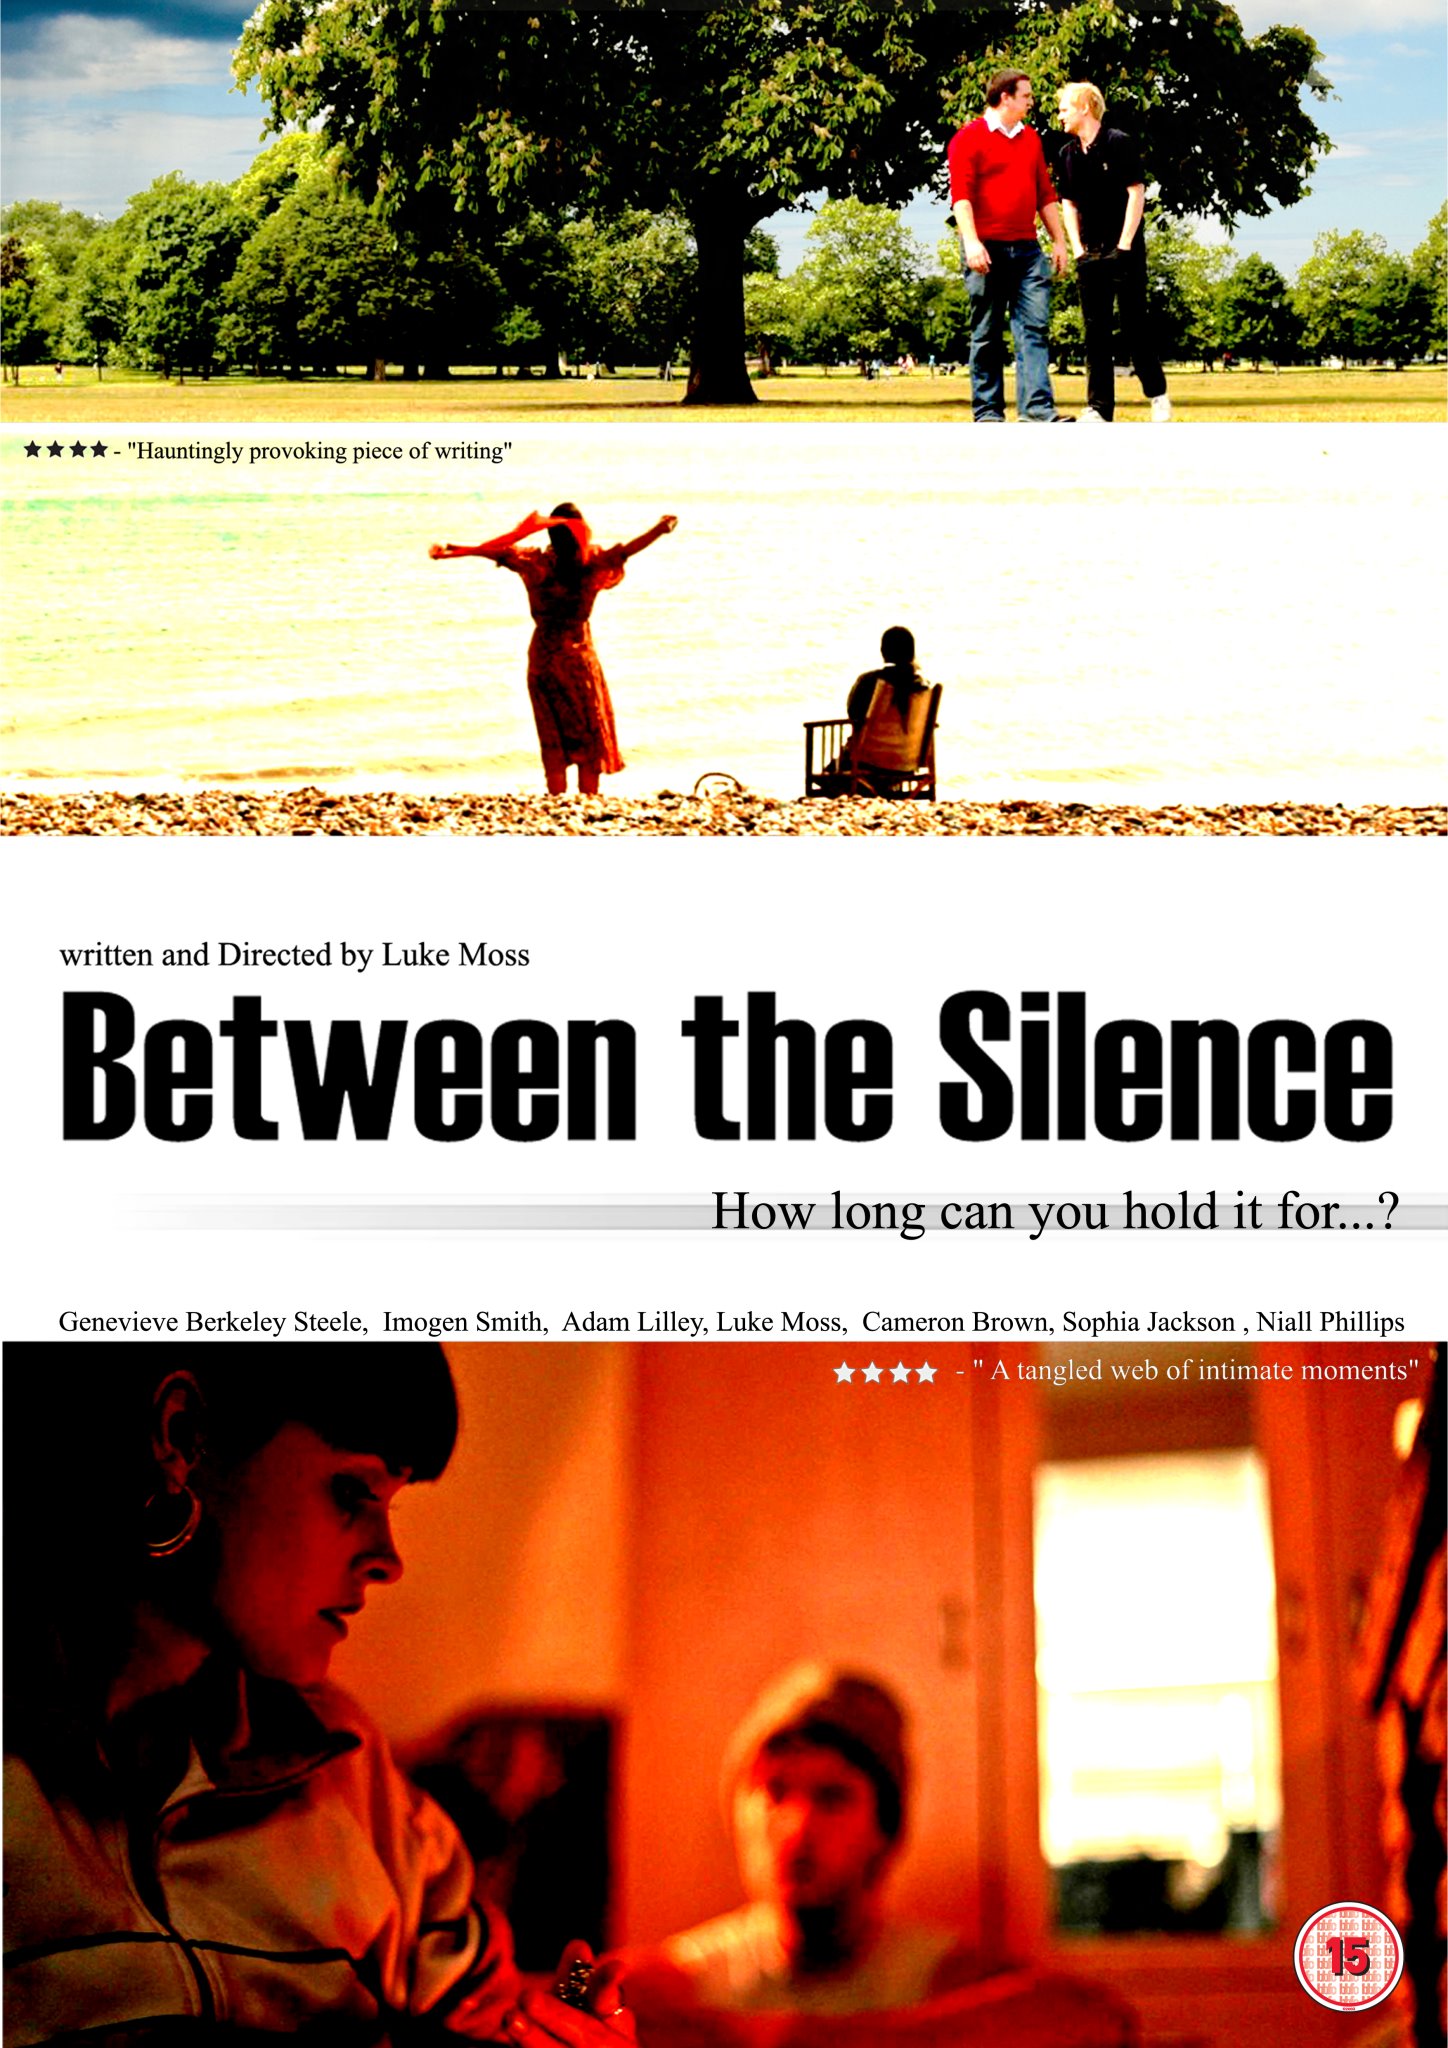 Between the Silence